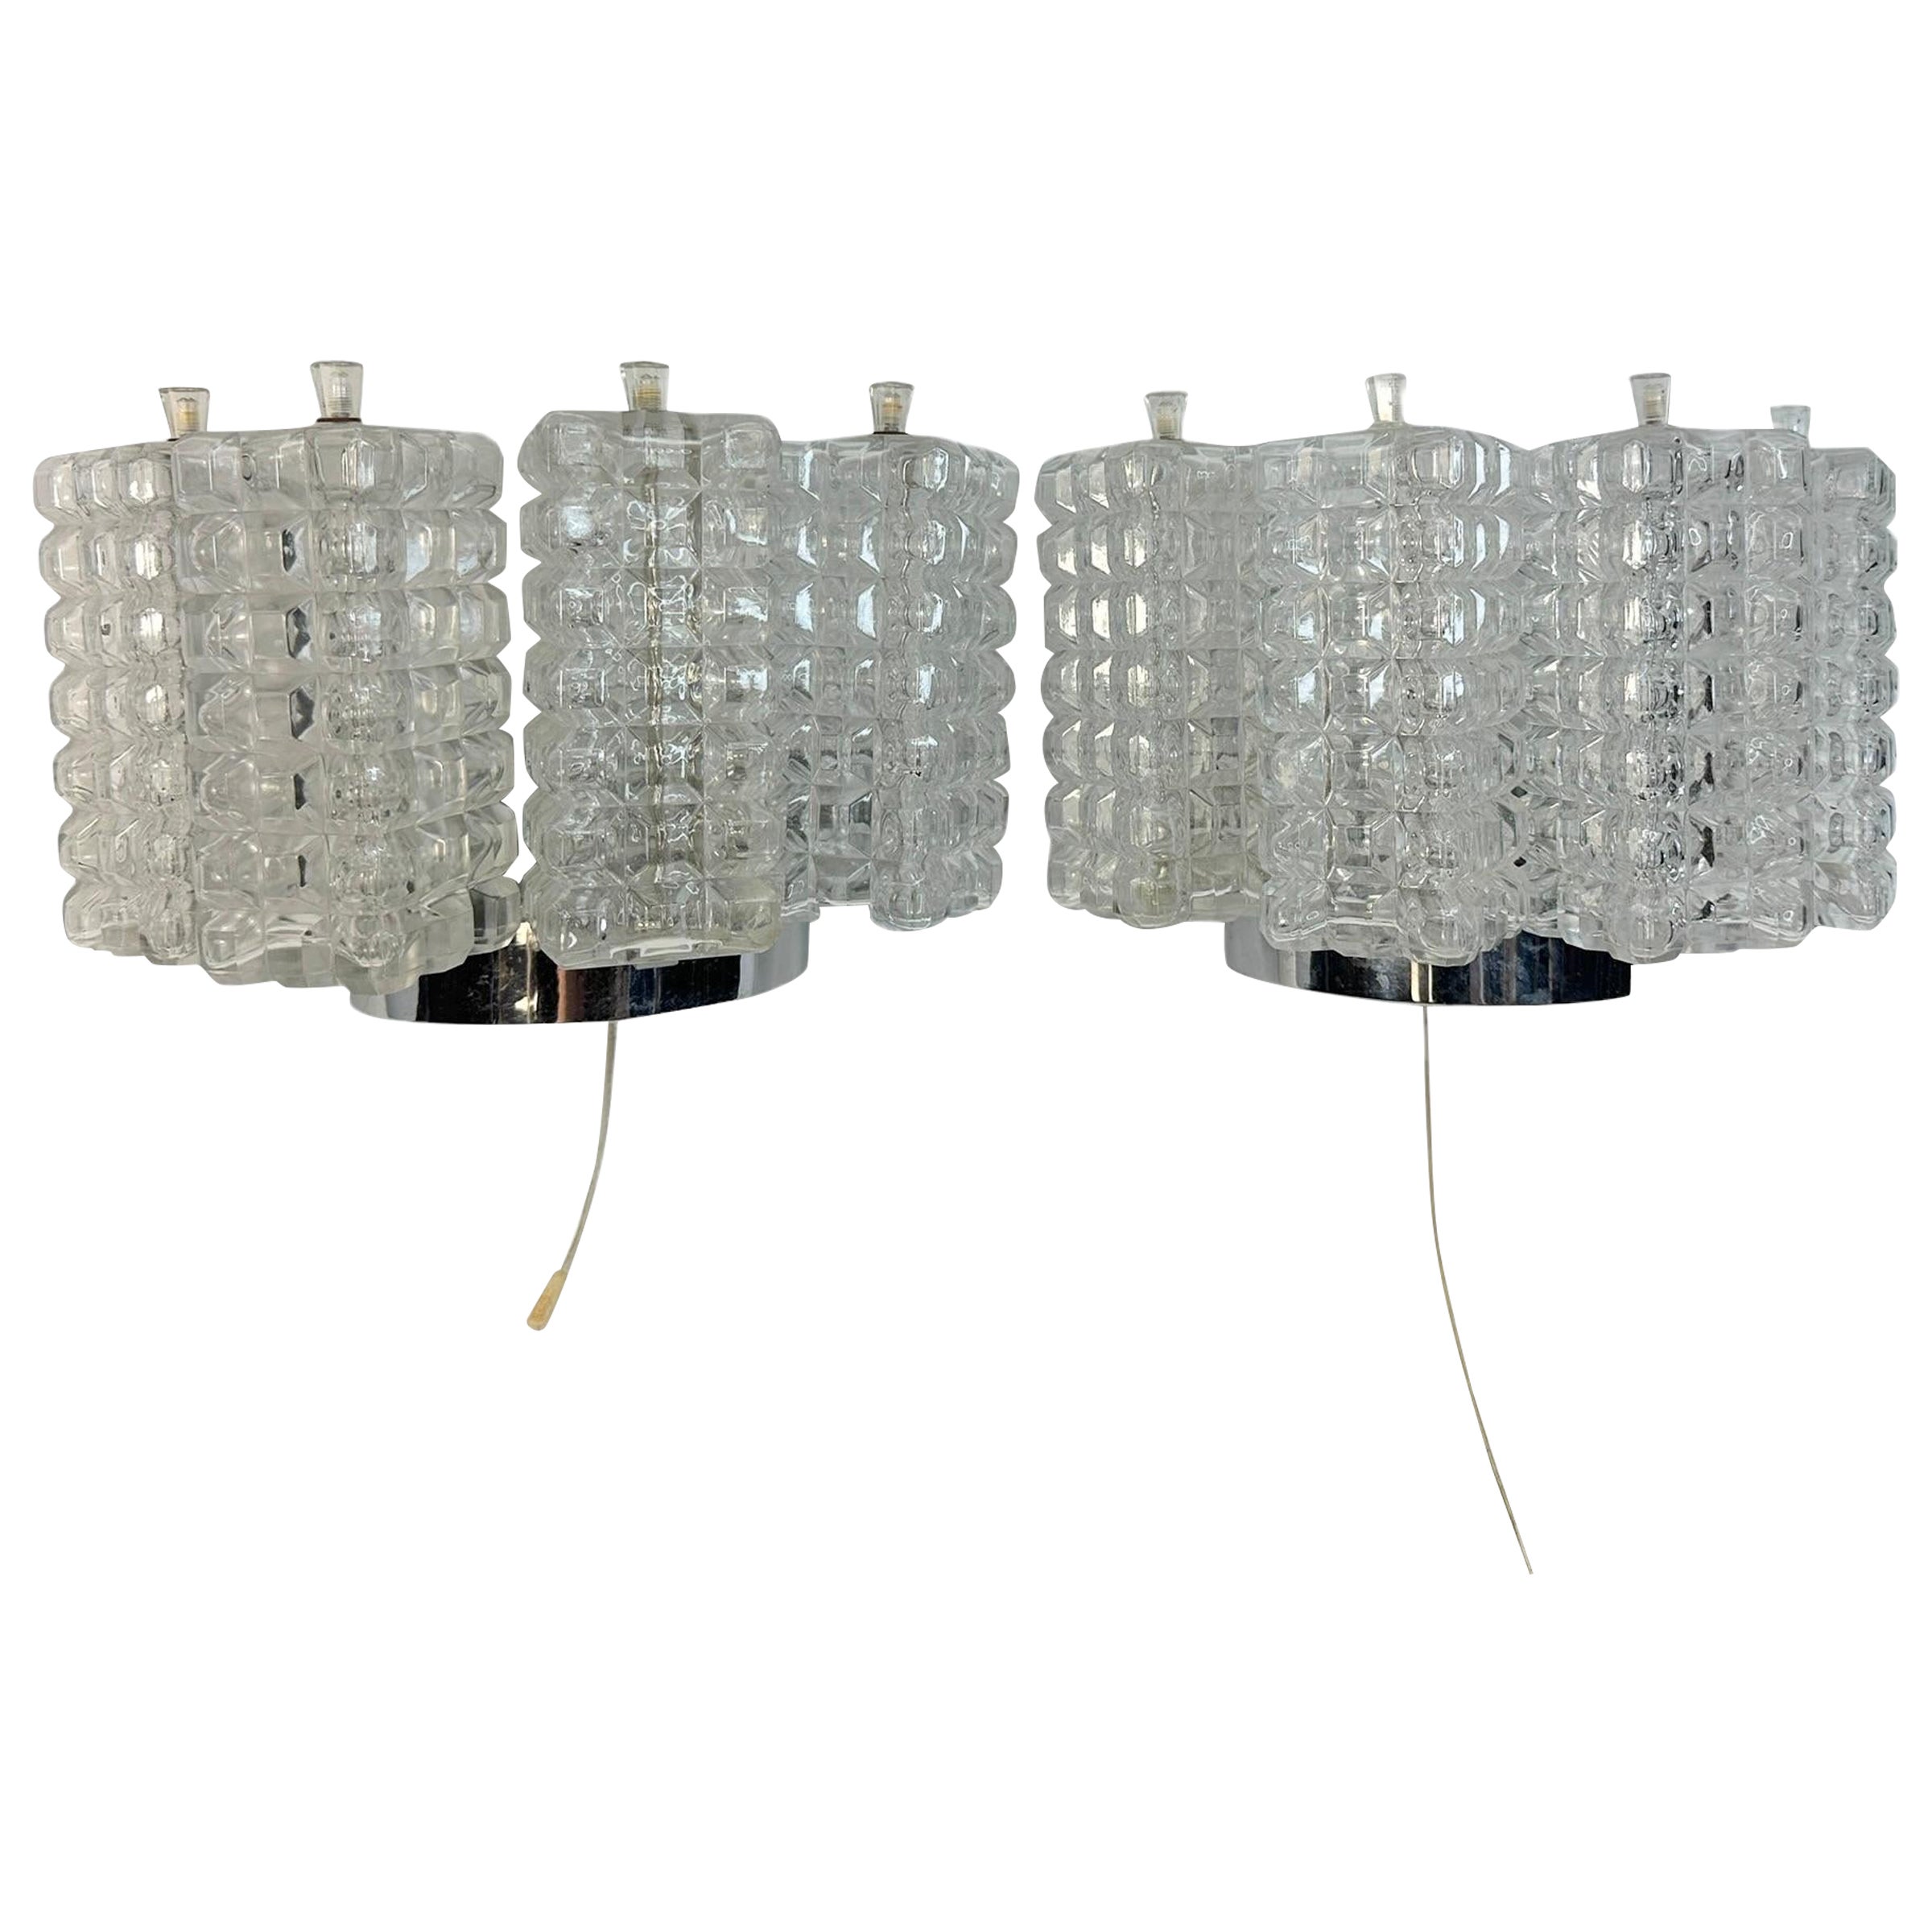 Pair of Glass Cube Sconces Wall Lights by Austrolux, Austria, 1960s For Sale